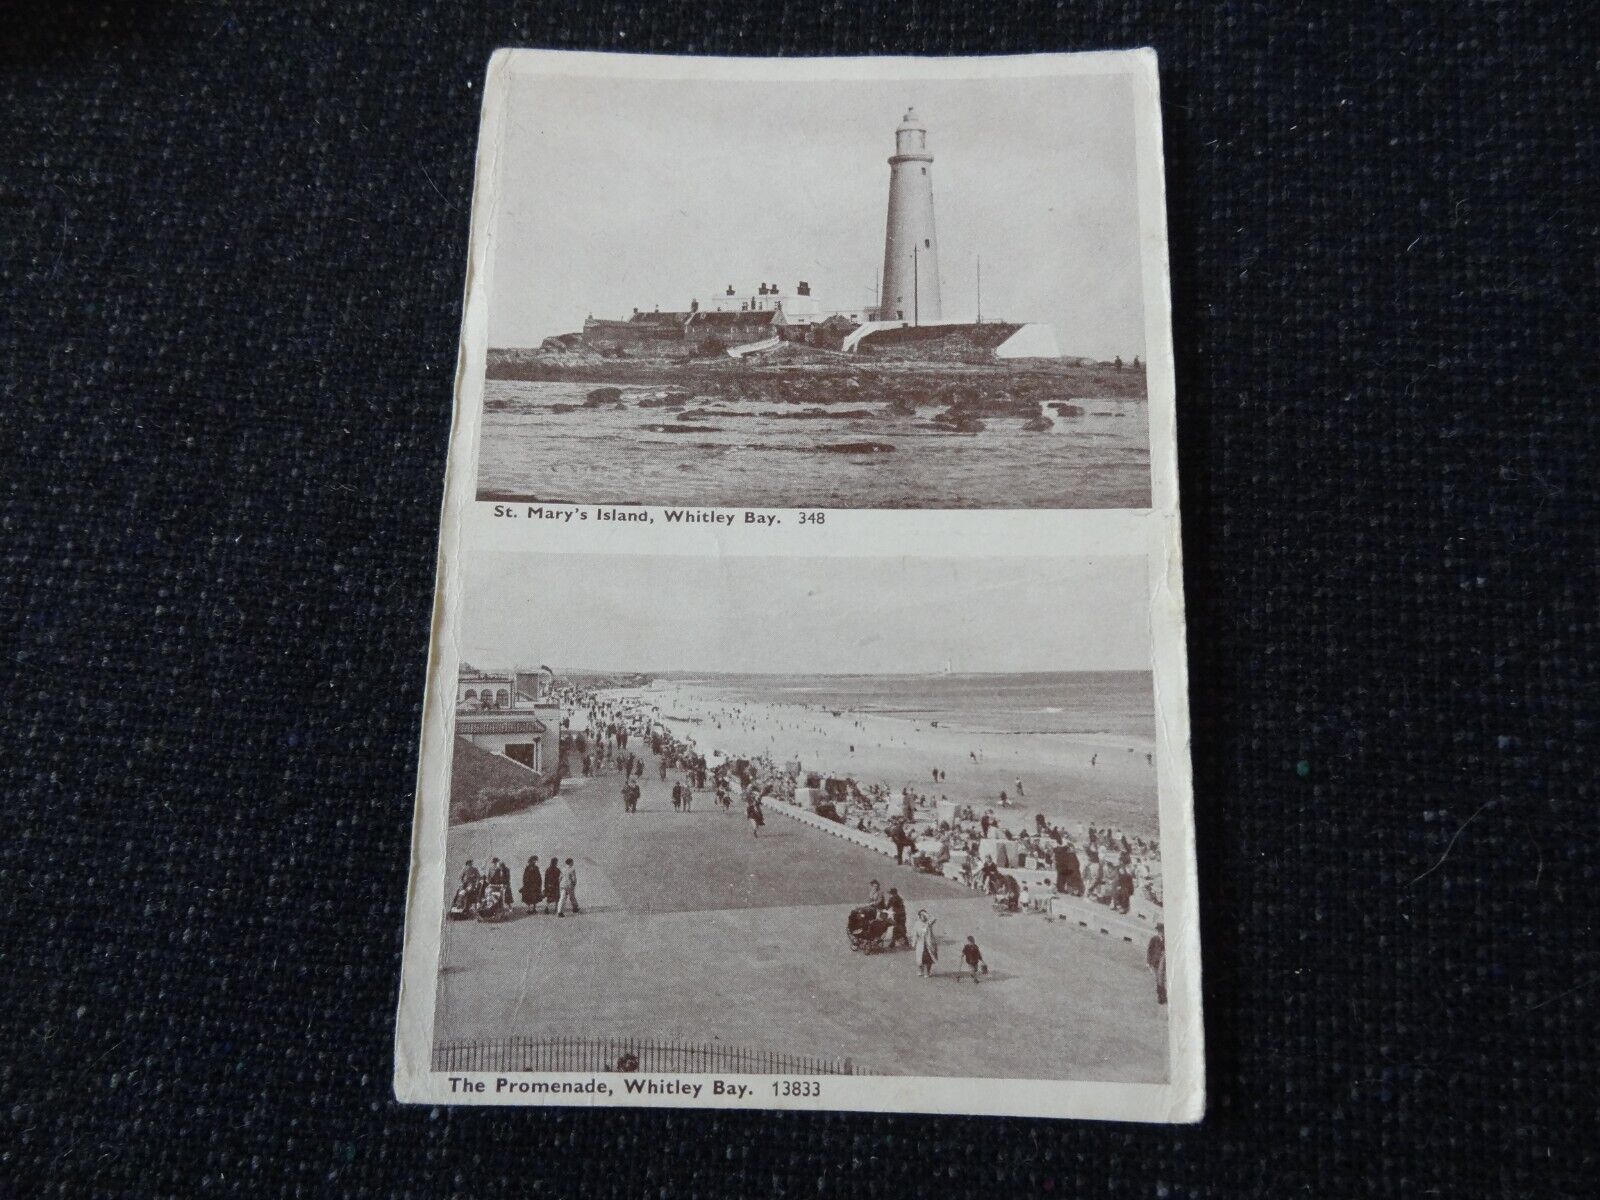 House Clearance - st marys island & the promenade whitley bay service - 61874